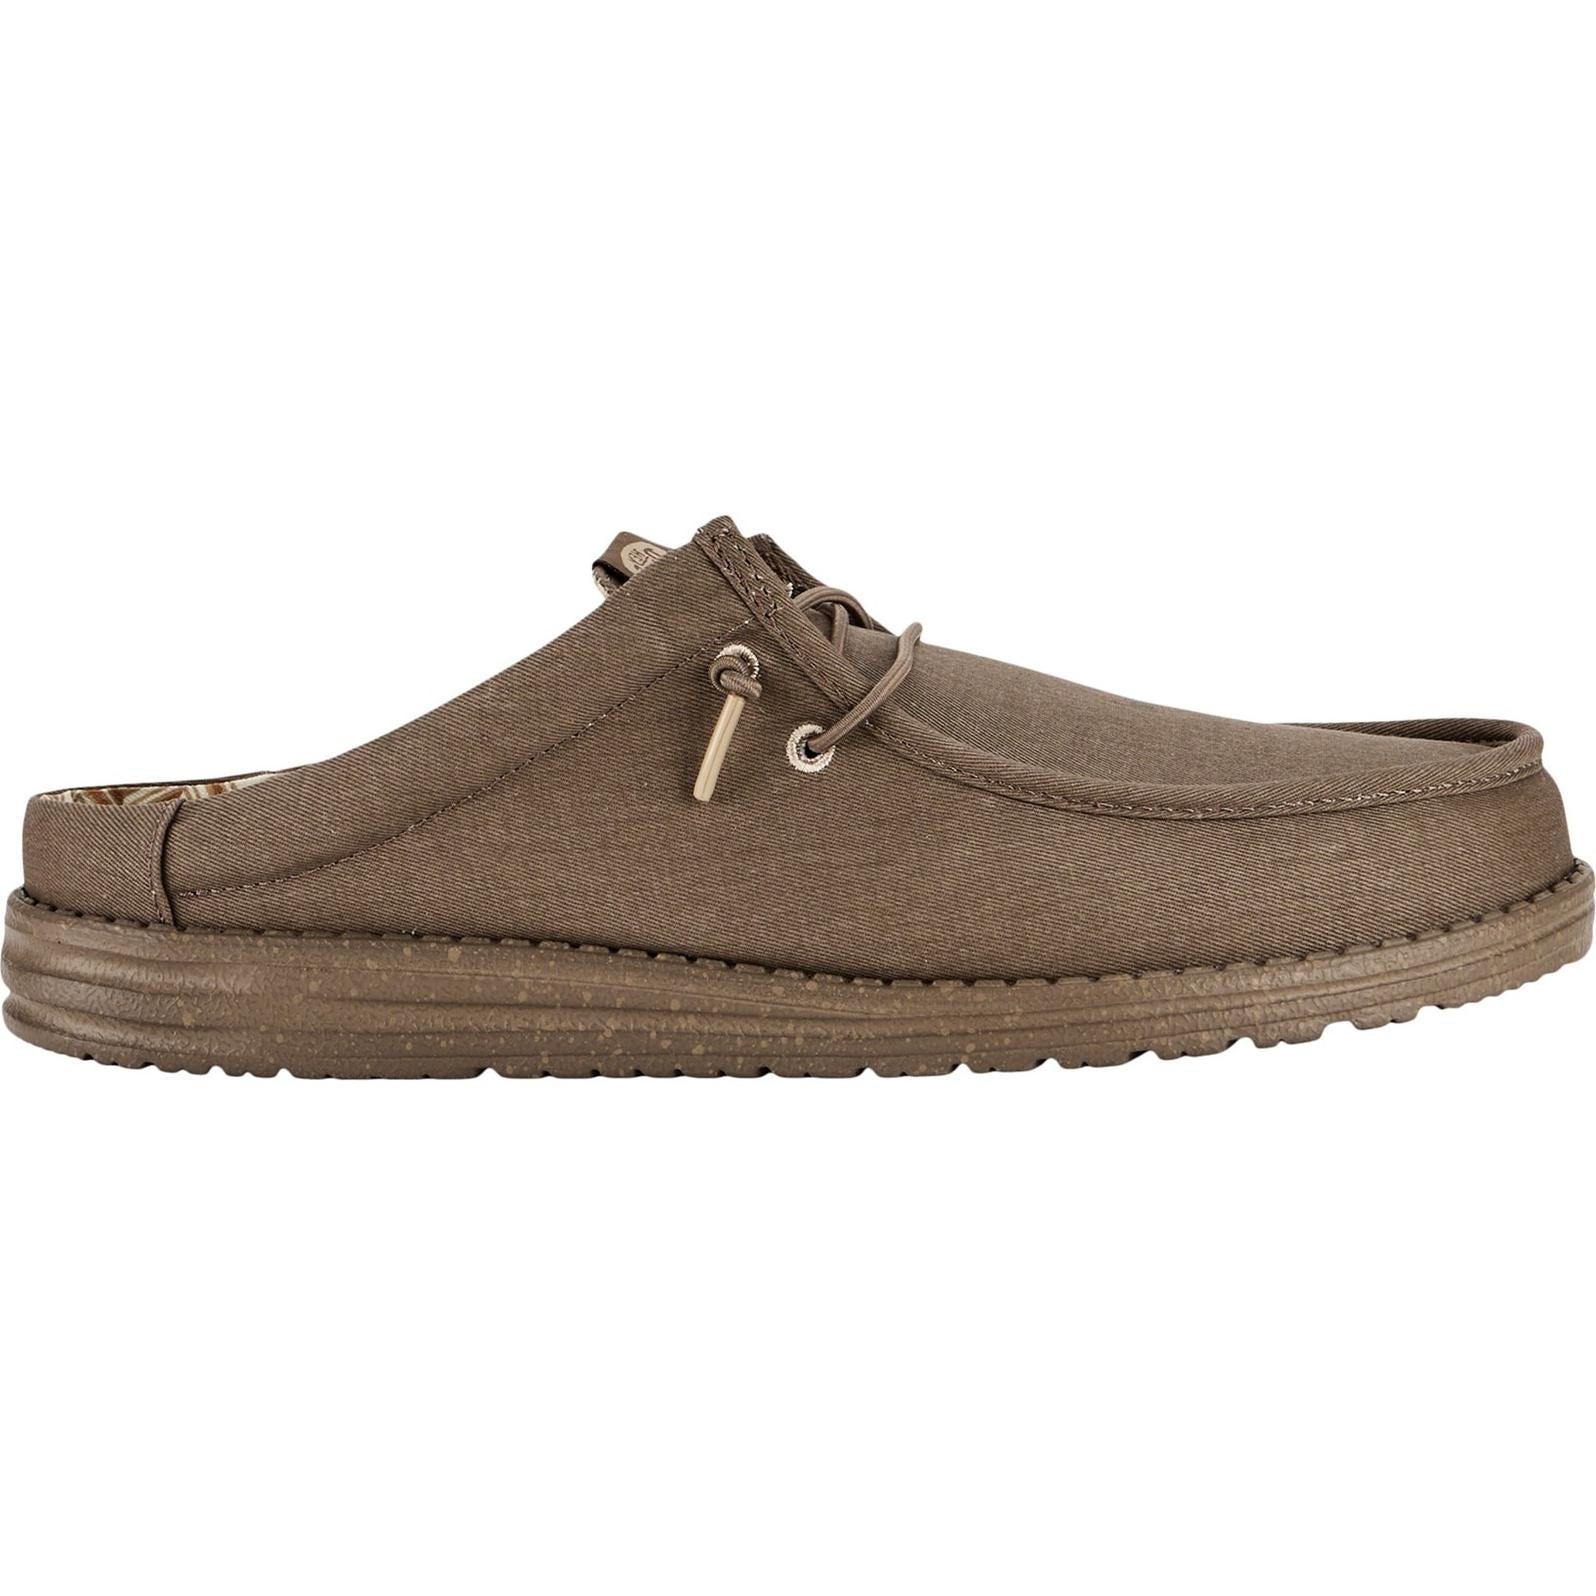 Hey Dude Wally Slip Canvas Mule Shoes